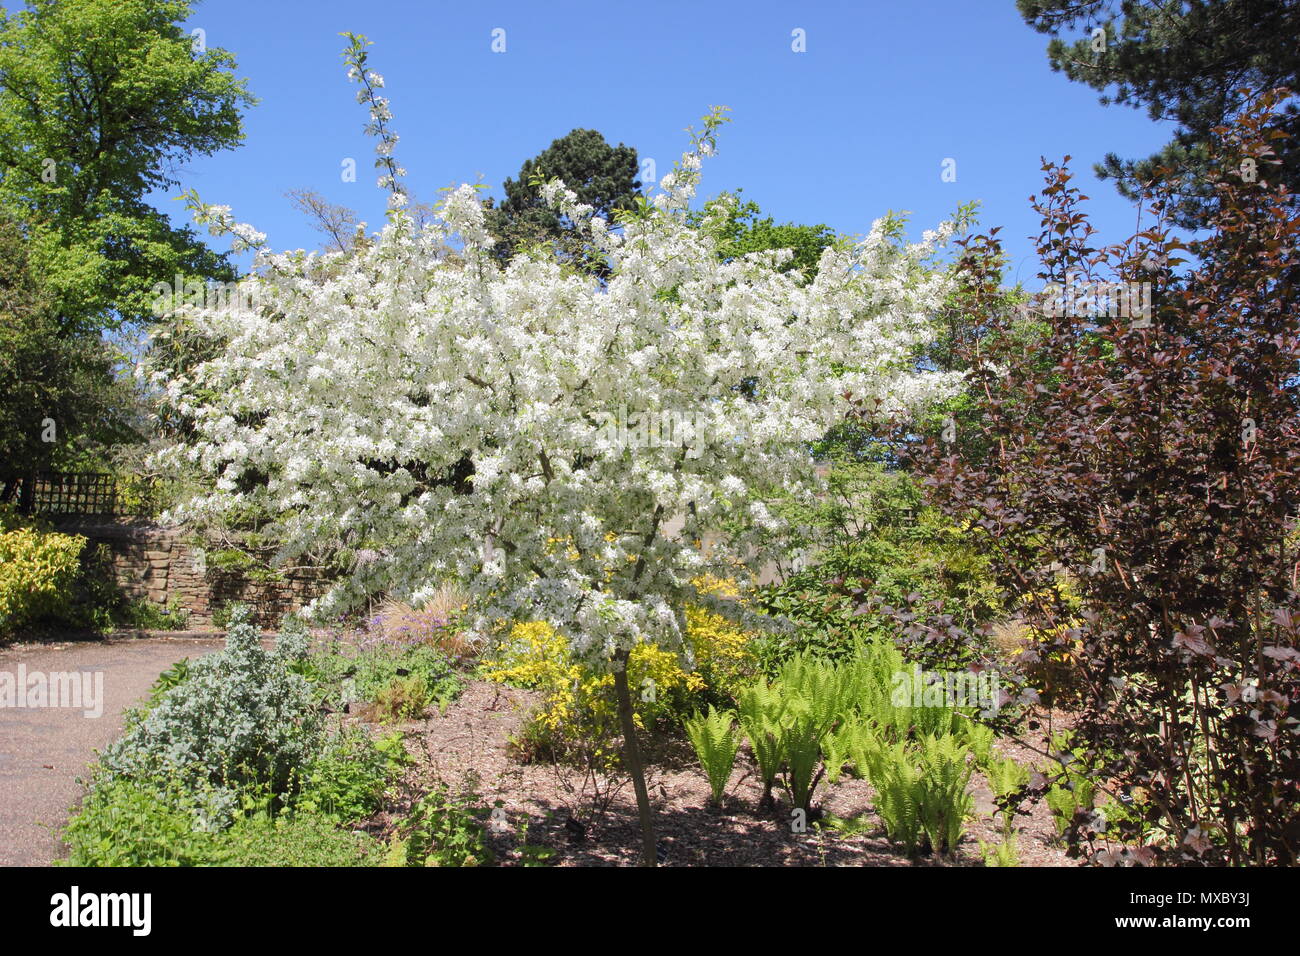 Malus transitoria. Cut leaf crab apple tree in full blossom in spring,, England, UK Stock Photo